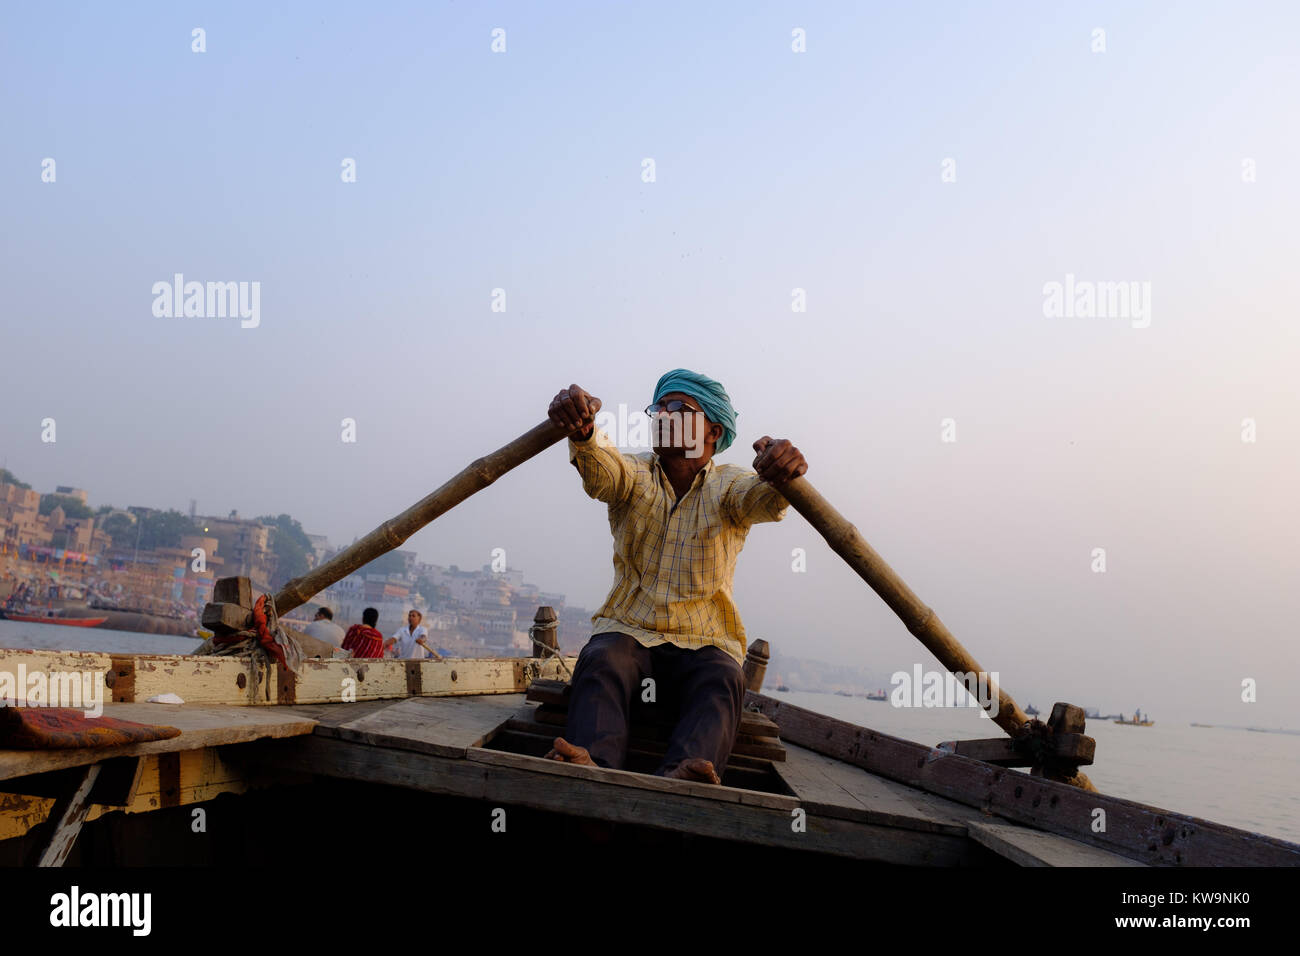 Man rowing boat on Ganges River in Varanasi, northern India. Stock Photo